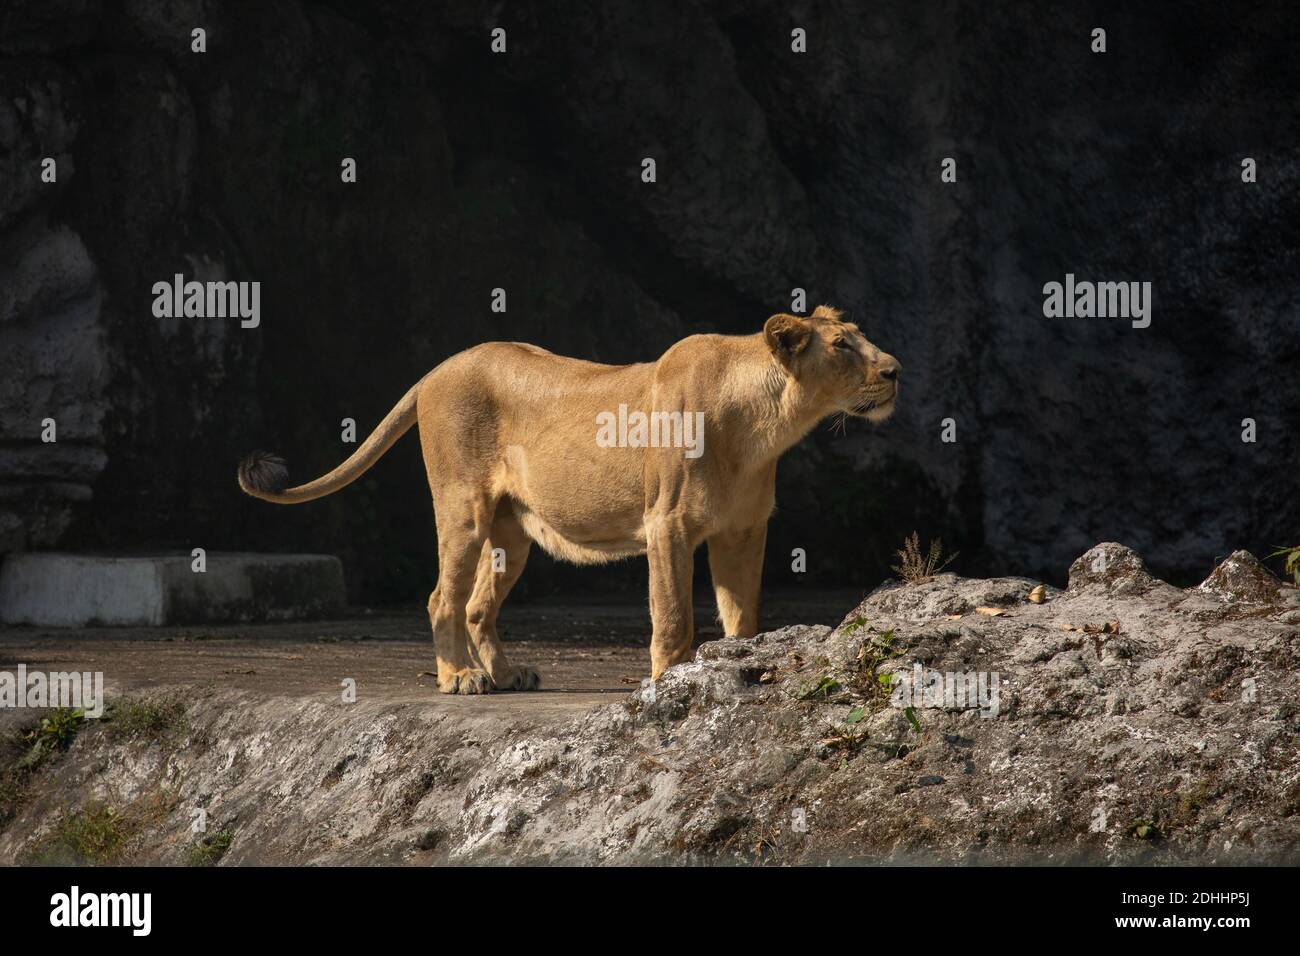 African lioness in an open enclosure at a Indian wildlife sanctuary Stock Photo